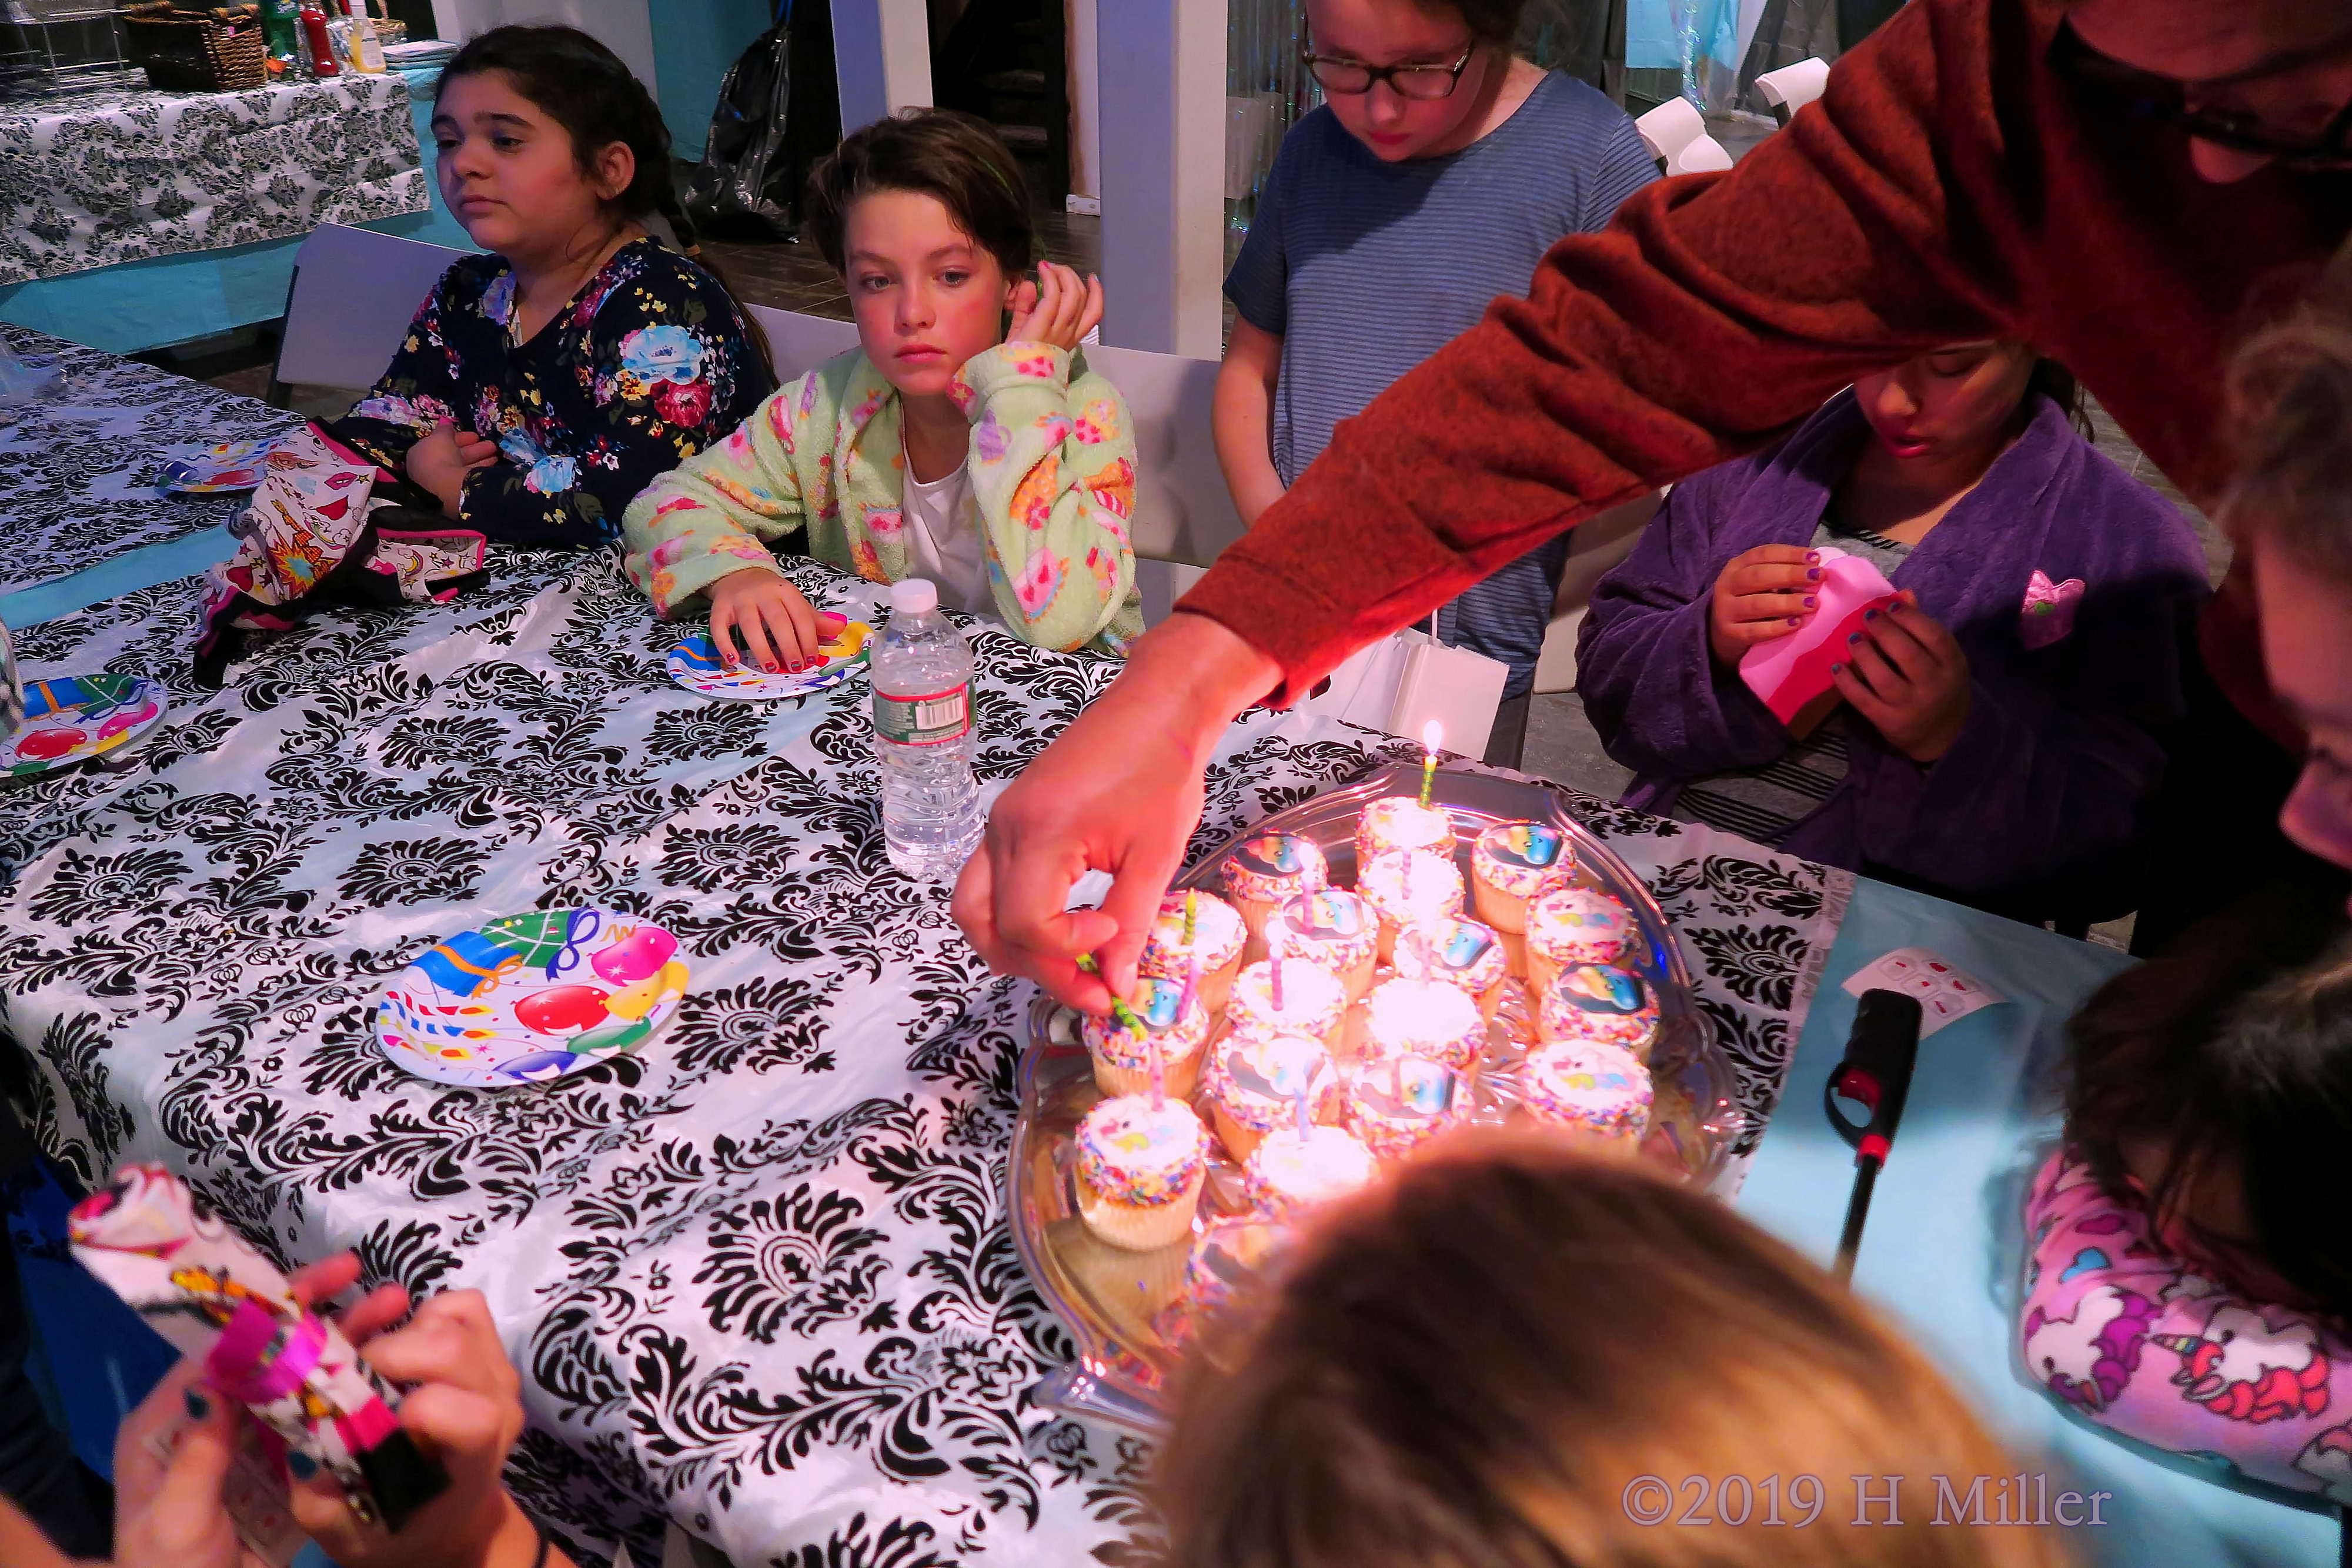 Spa Party For Kids Simmers Down By Candlelight To Sing Happy Birthday To The Birthday Girl! 4